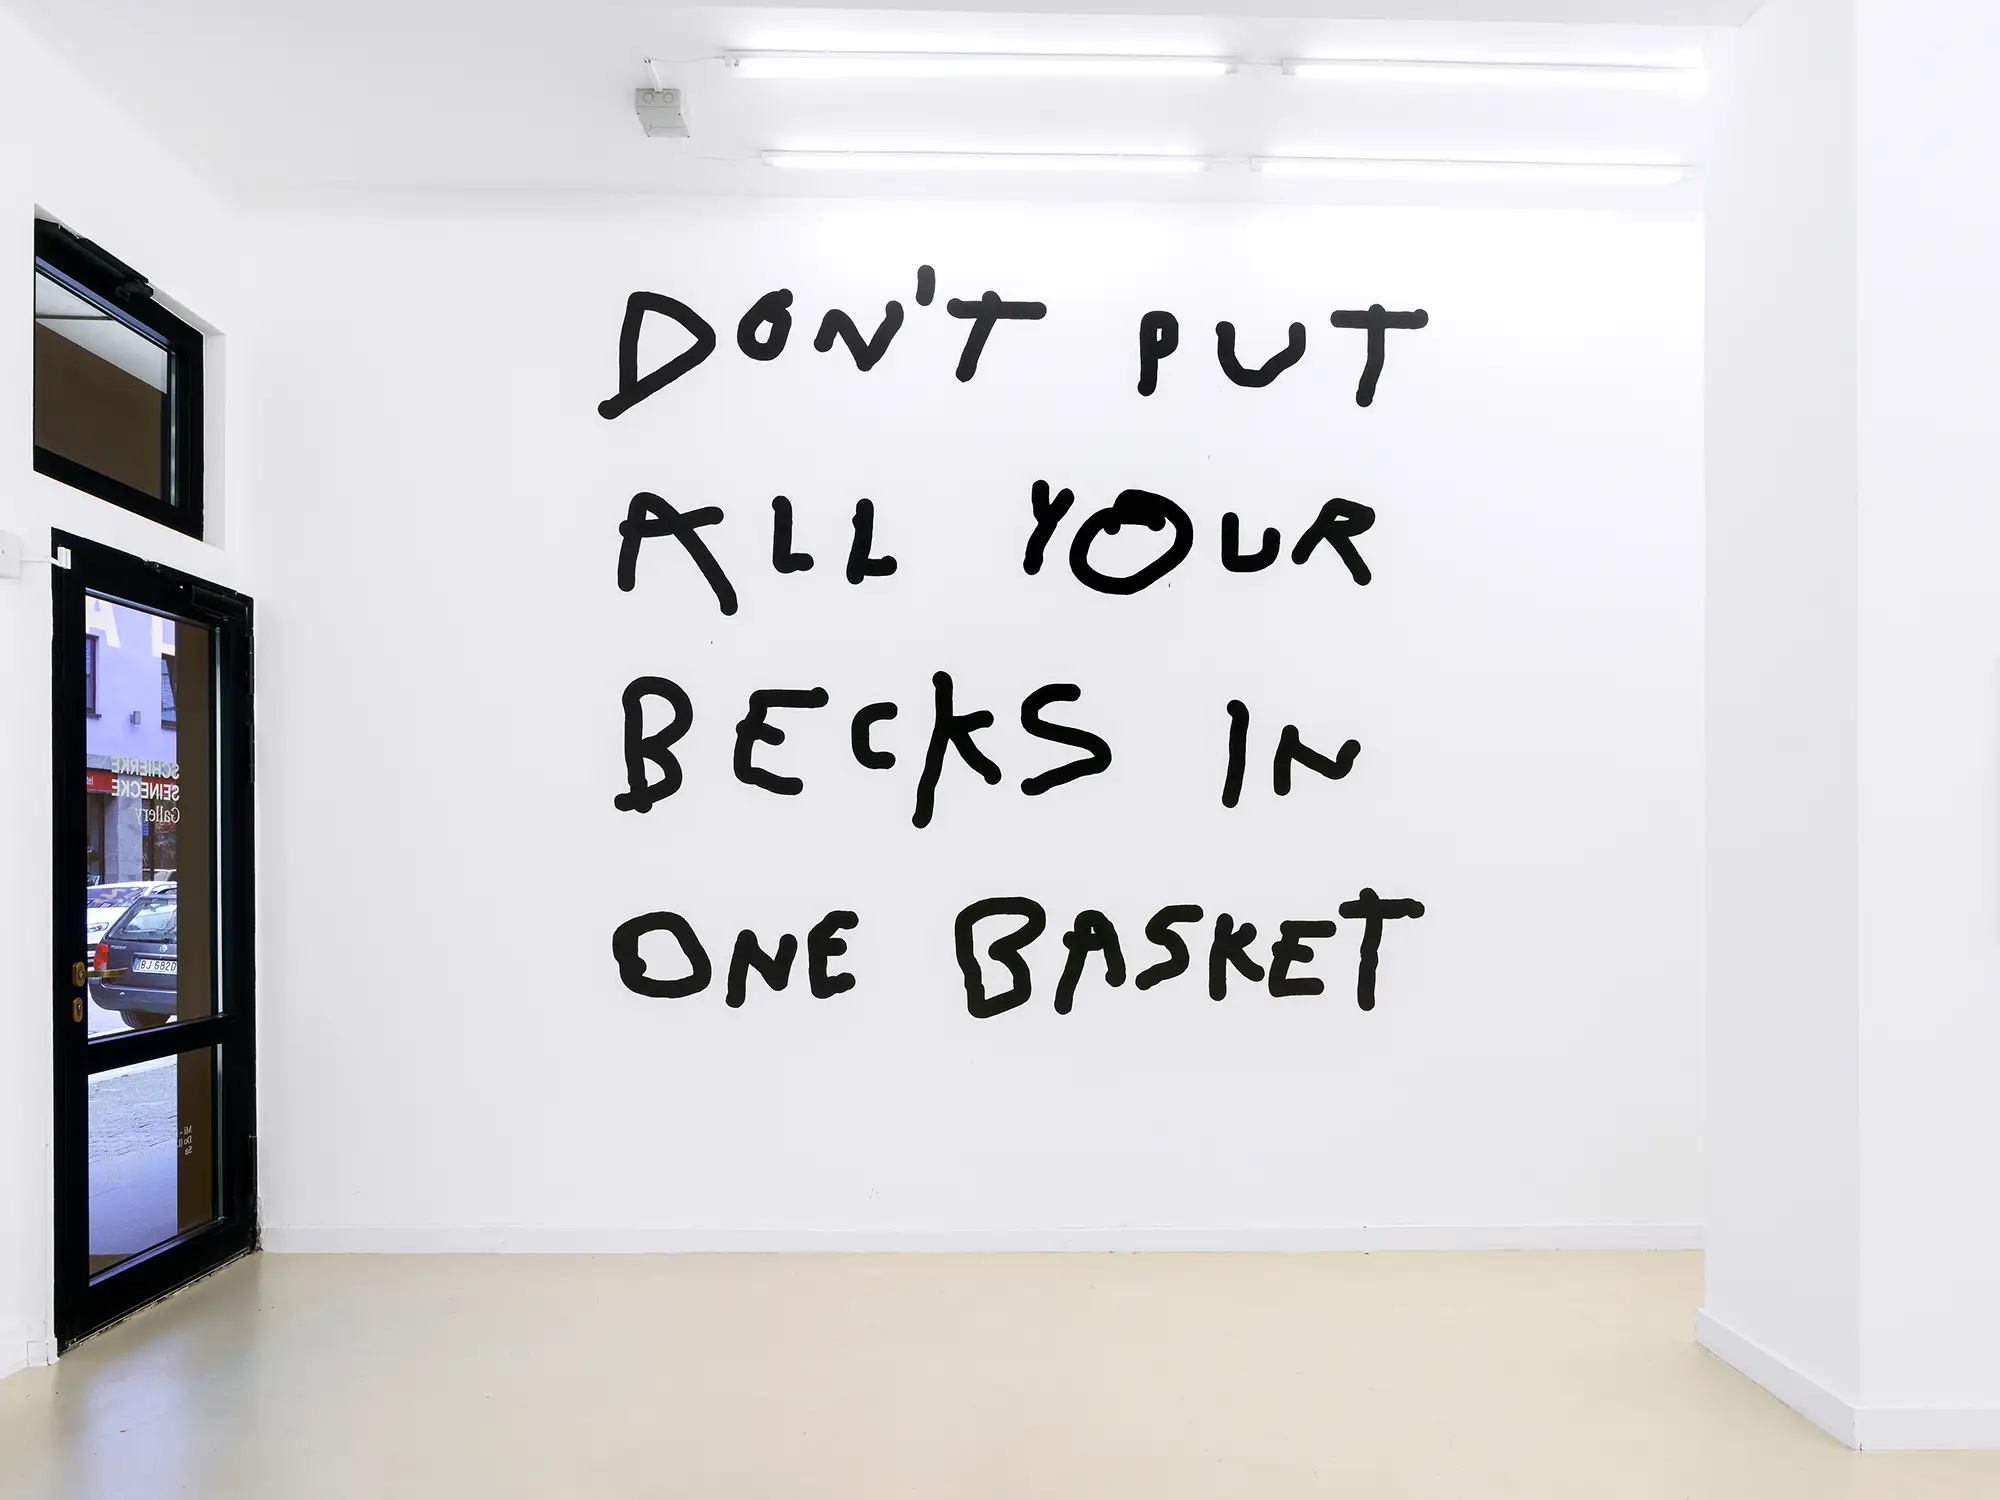 arno beck exhibition text based art, wall piece, at schierke seinecke gallery now on view